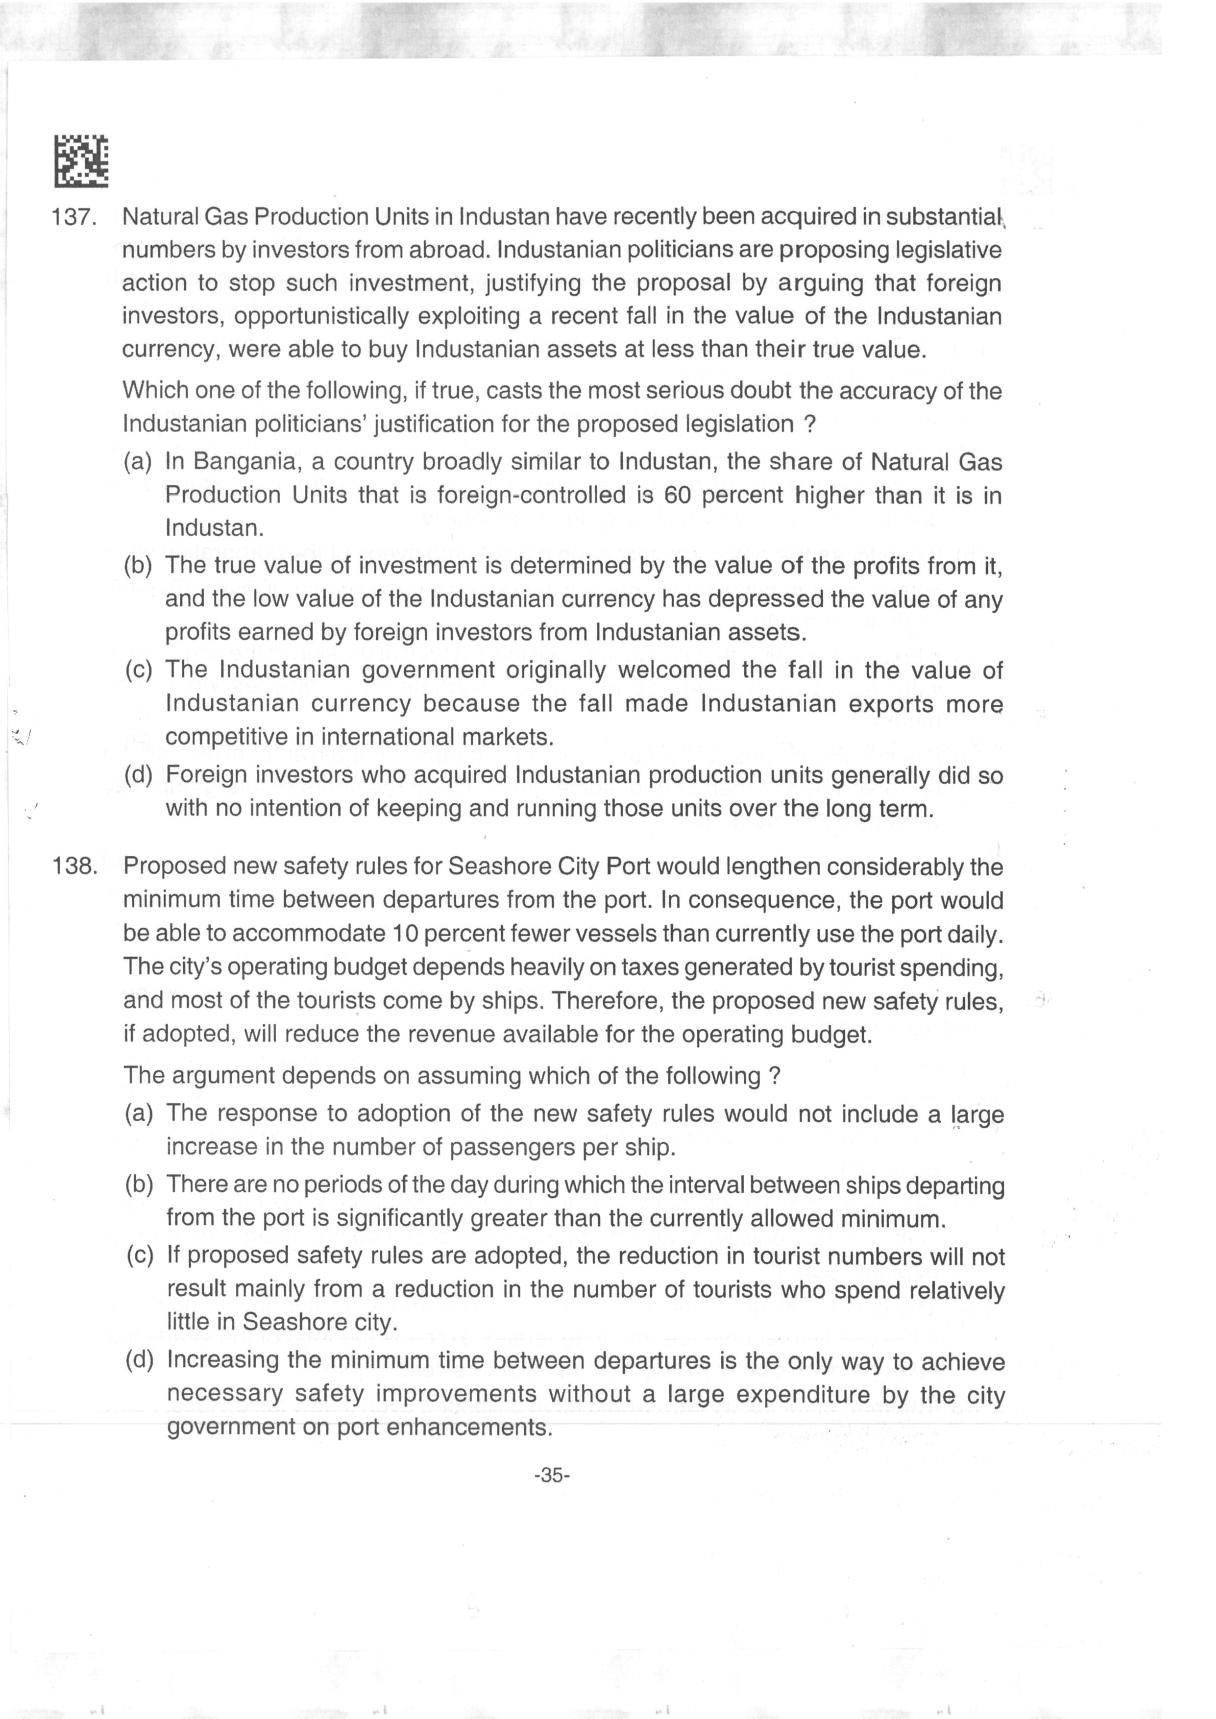 AILET 2019 Question Paper for BA LLB - Page 35